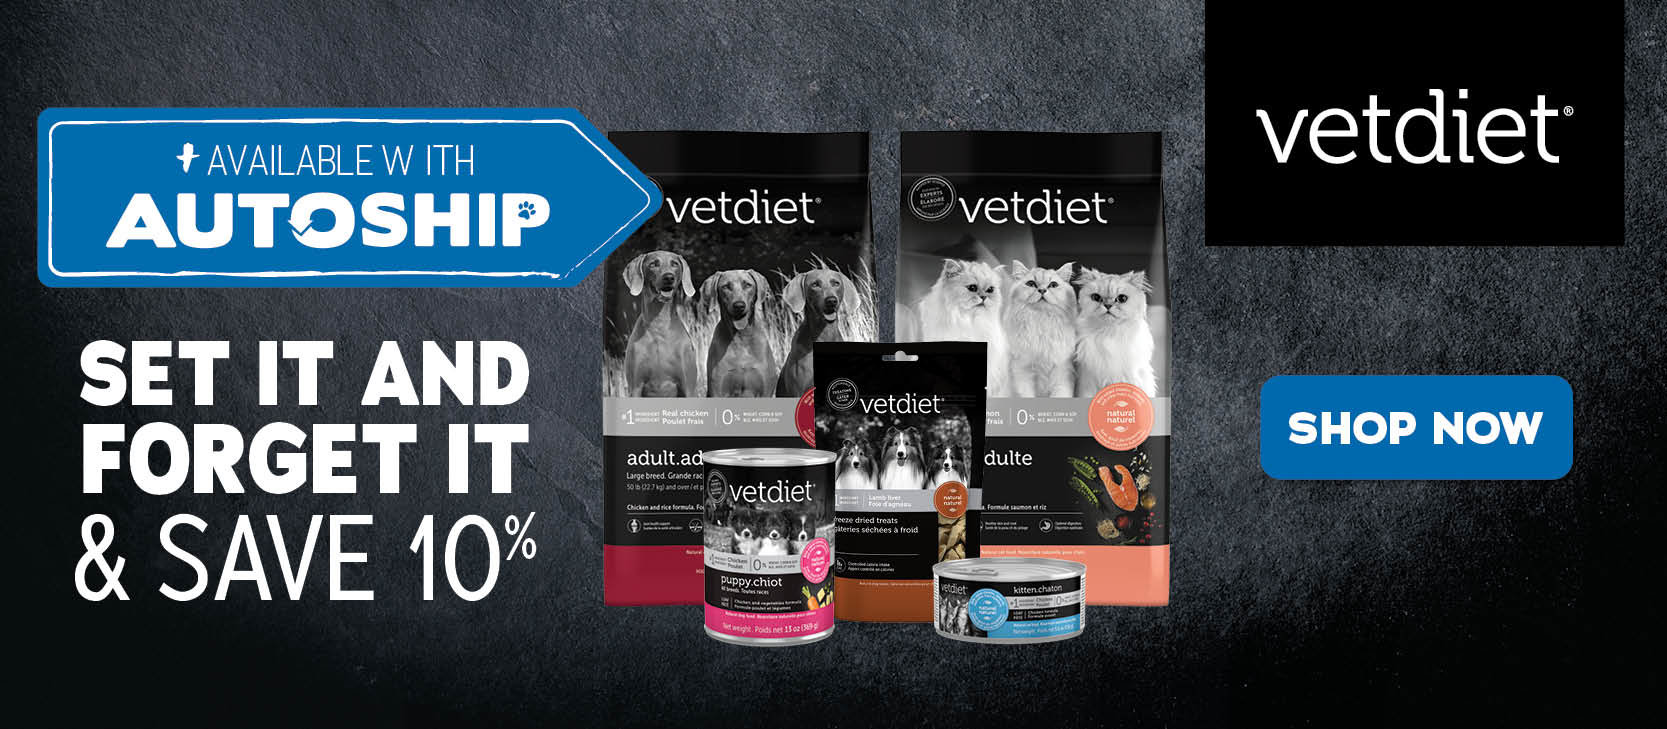 Save 10% off Vetdiet when you set it up for autoship!